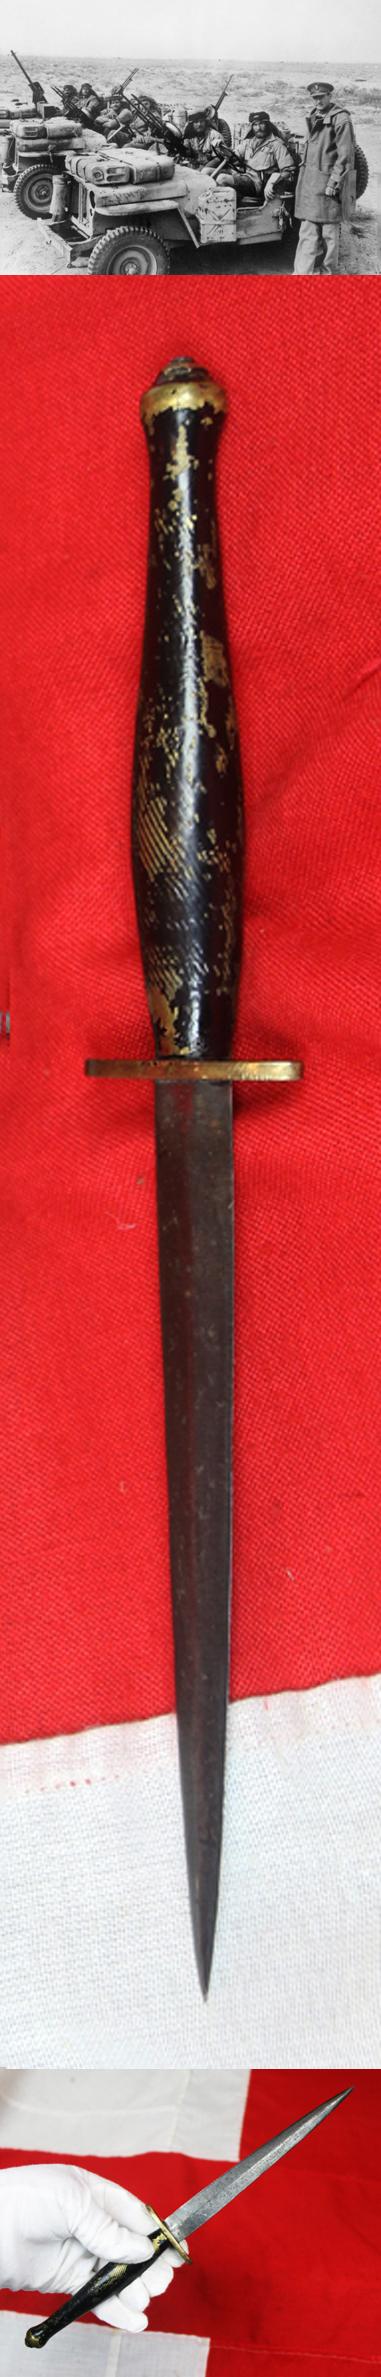 SOLD An FS Type Fighting Knife With Knurled Brass Hilt and Stilletto Blade